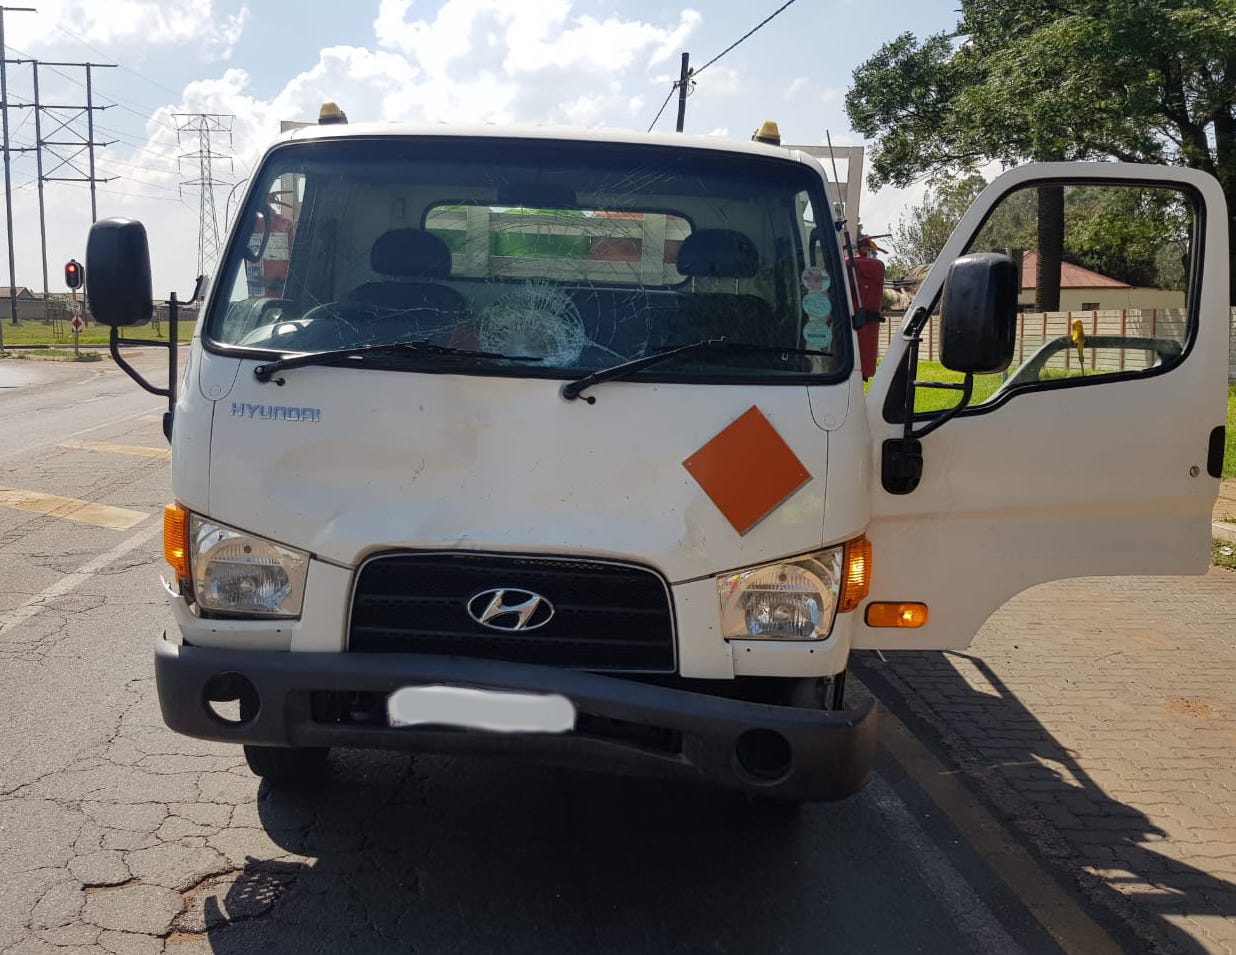 Pedestrian critical after being knocked over by truck in Benoni